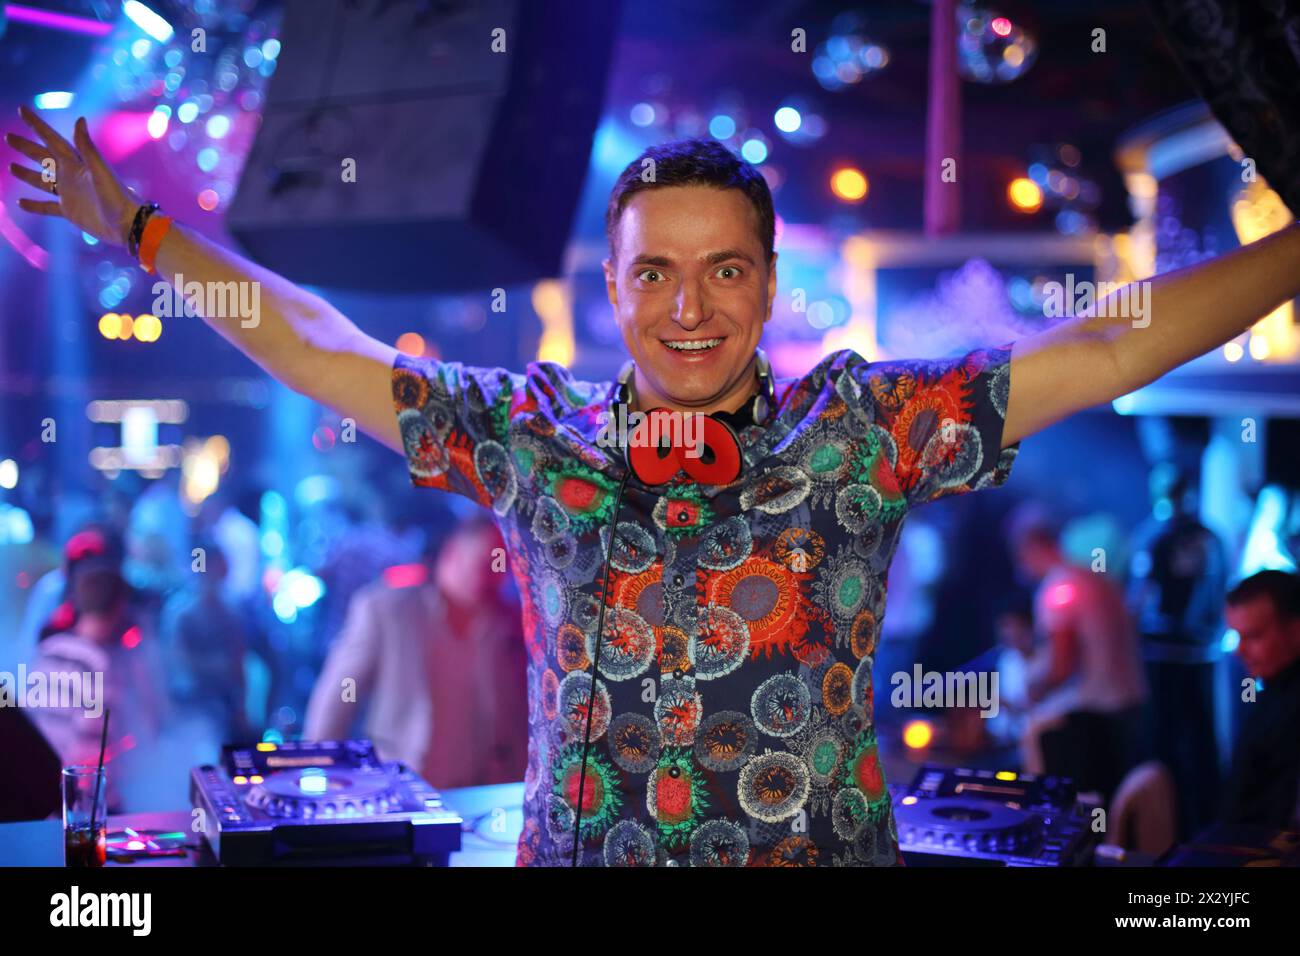 DJ in a club in colored shirt raised his hands up Stock Photo